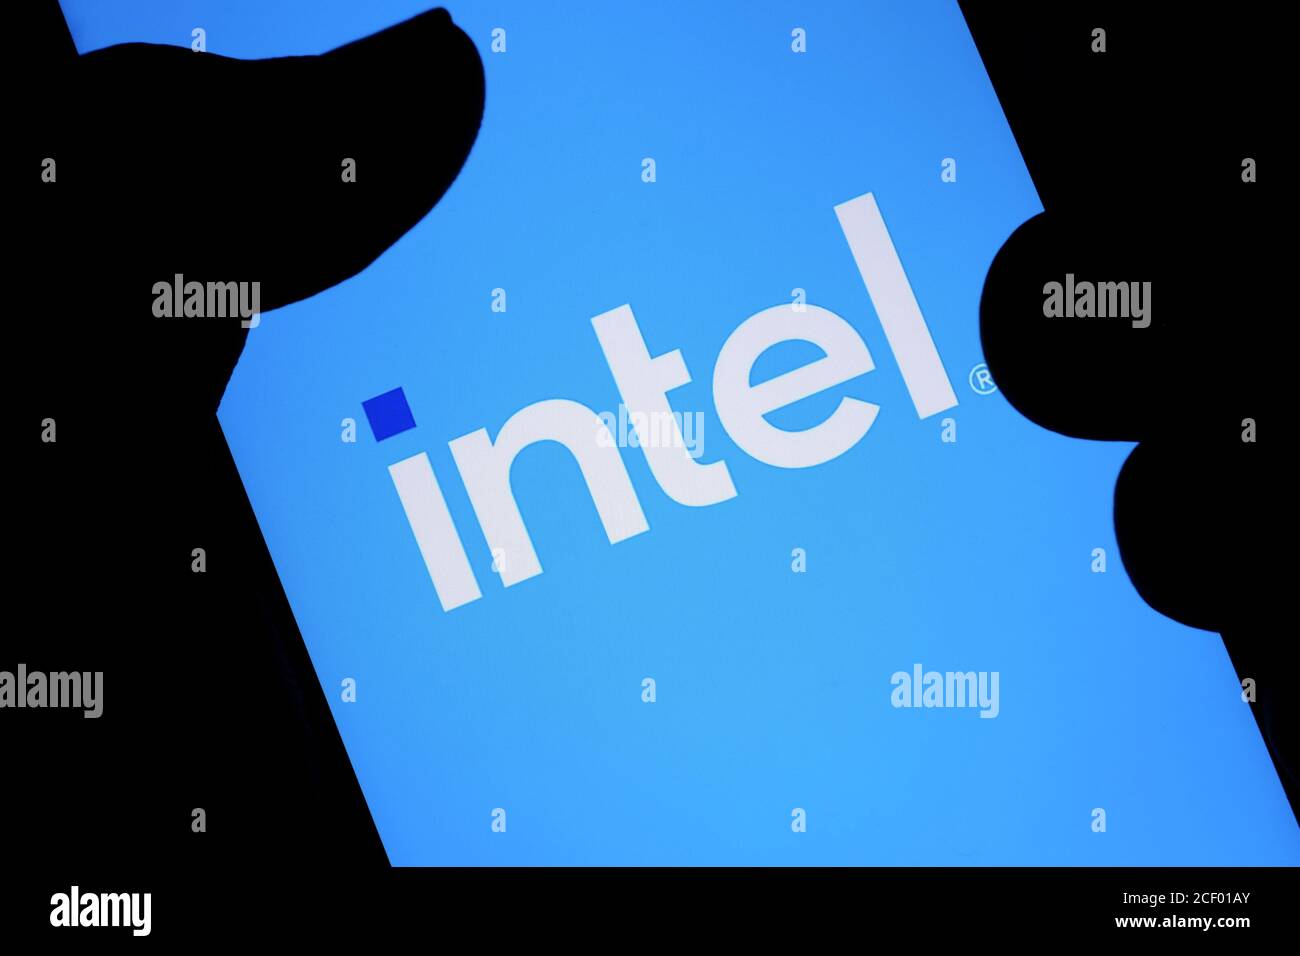 New Intel logo seen on the screen and blurred fingertip touching it in a dark. Intel presented its rebranded logotype Stock Photo